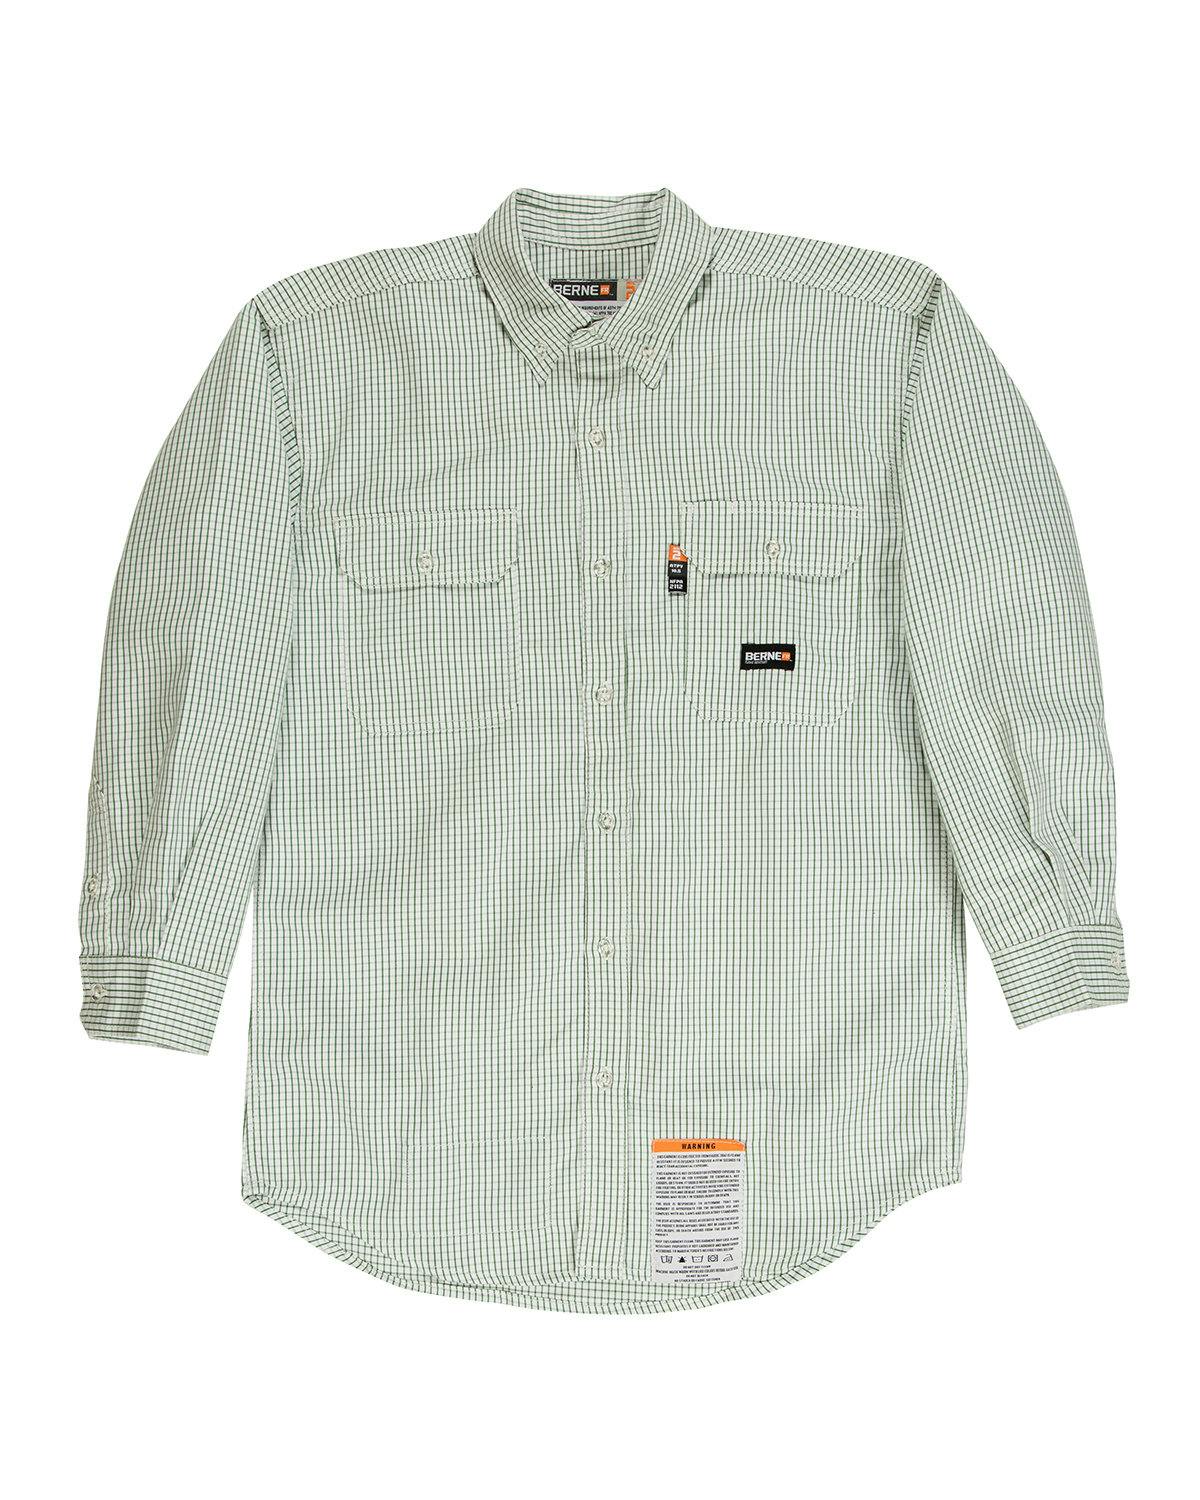 Image for Men's Flame-Resistant Down Plaid Work Shirt